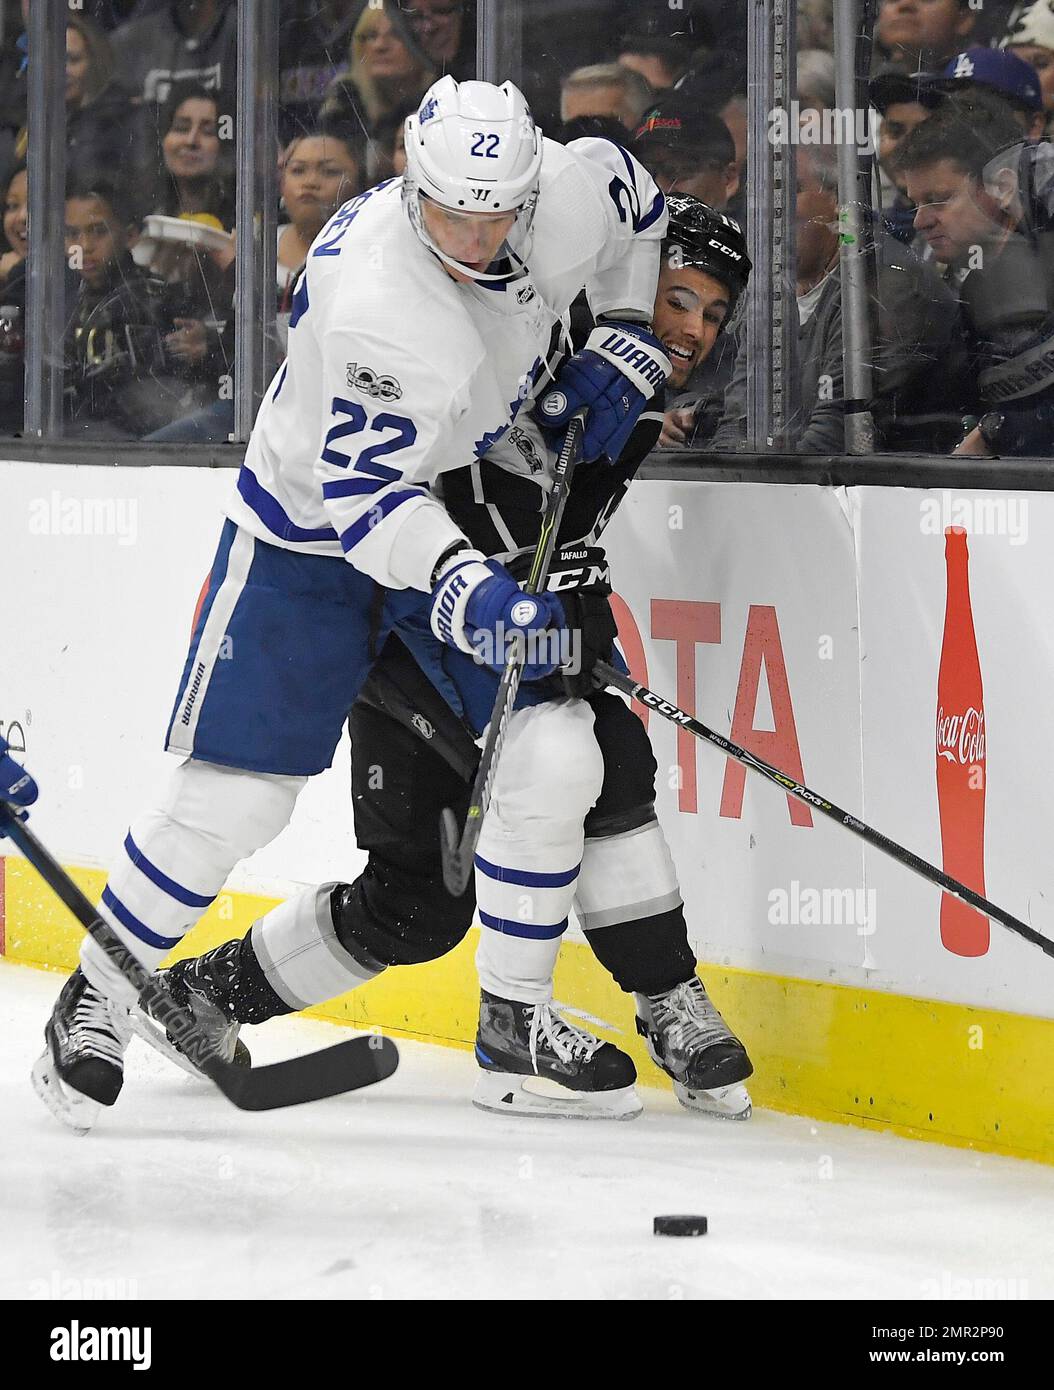 Toronto Maple Leafs defenseman Nikita Zaitsev, left, of Russia, and Los Angeles Kings center Alex Iafallo watch the puck during the second period of an NHL hockey game, Thursday, Nov